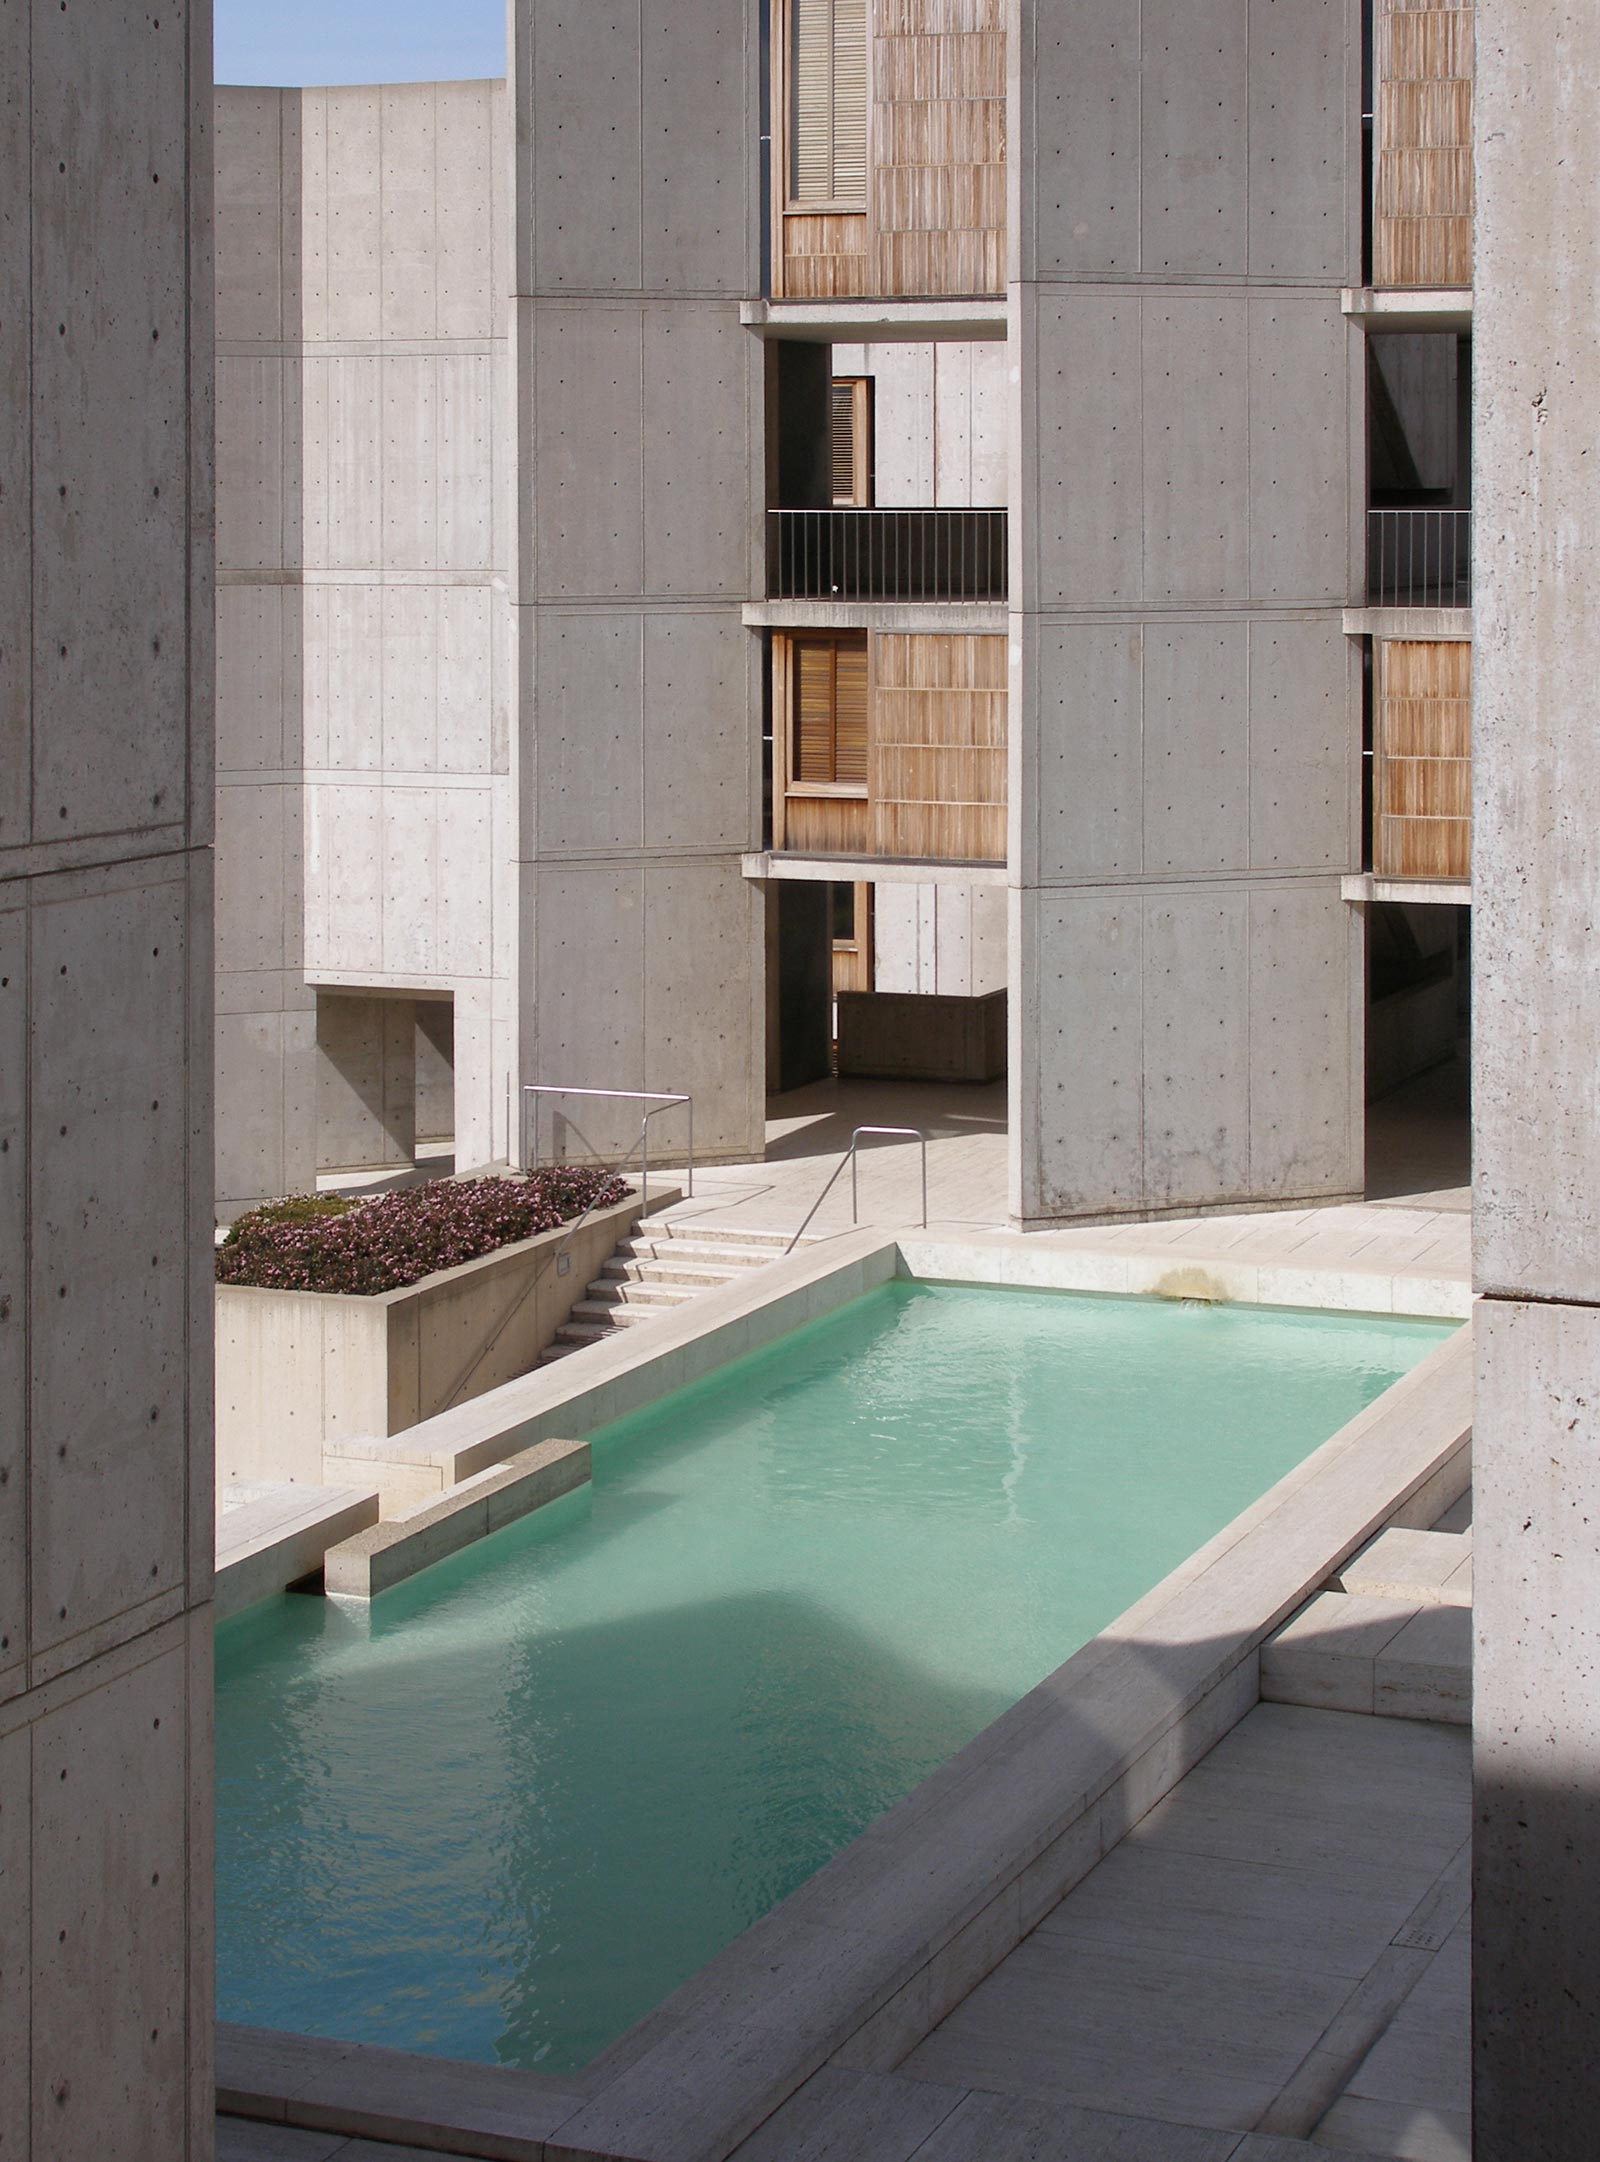 Salk Institute for Biological Studies / Louis Kahn [United States, 1959 -  1965] “Hope lies in dreams, in imagination and in the courage…